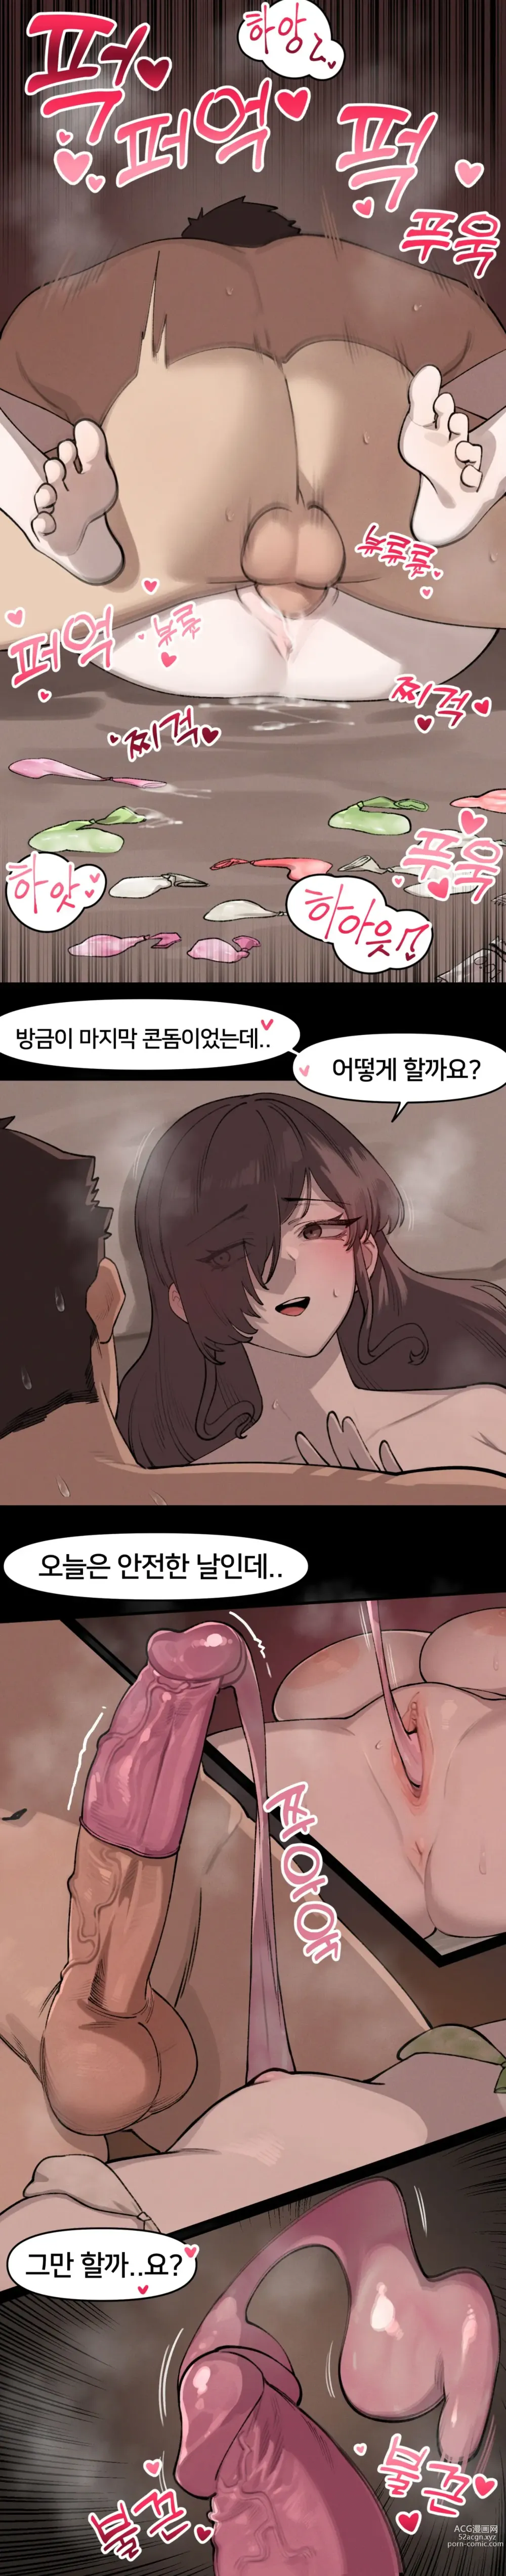 Page 4 of doujinshi Lady Next Door (uncensored)